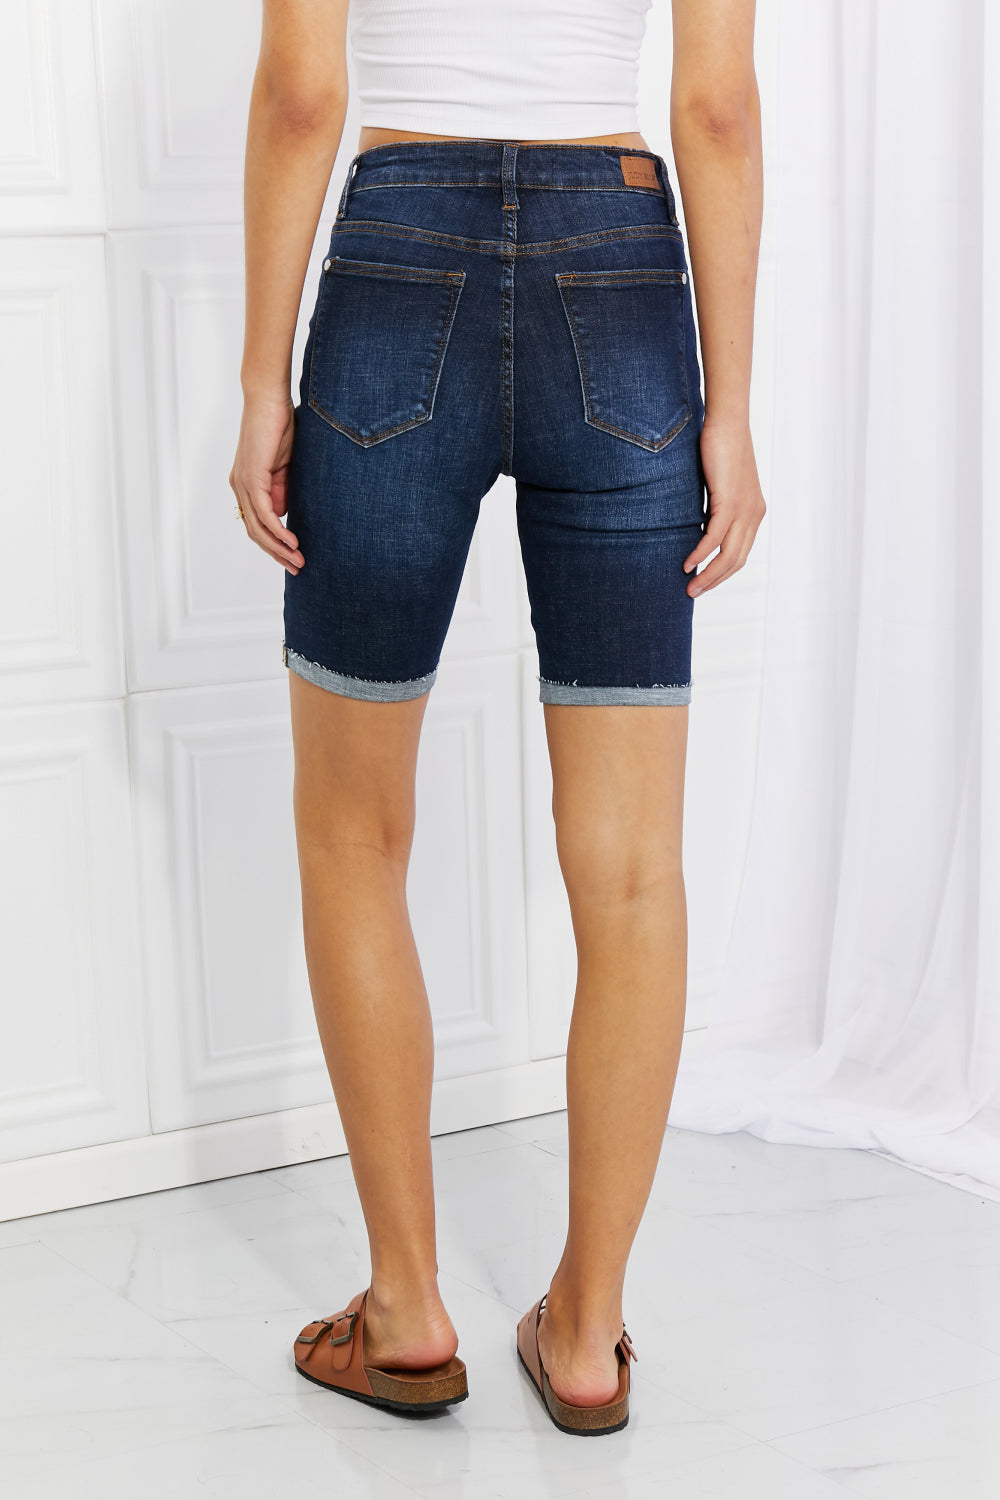 Back View, Judy Blue, High-Rise Patch Destroyed Bermuda Shorts Style 150115